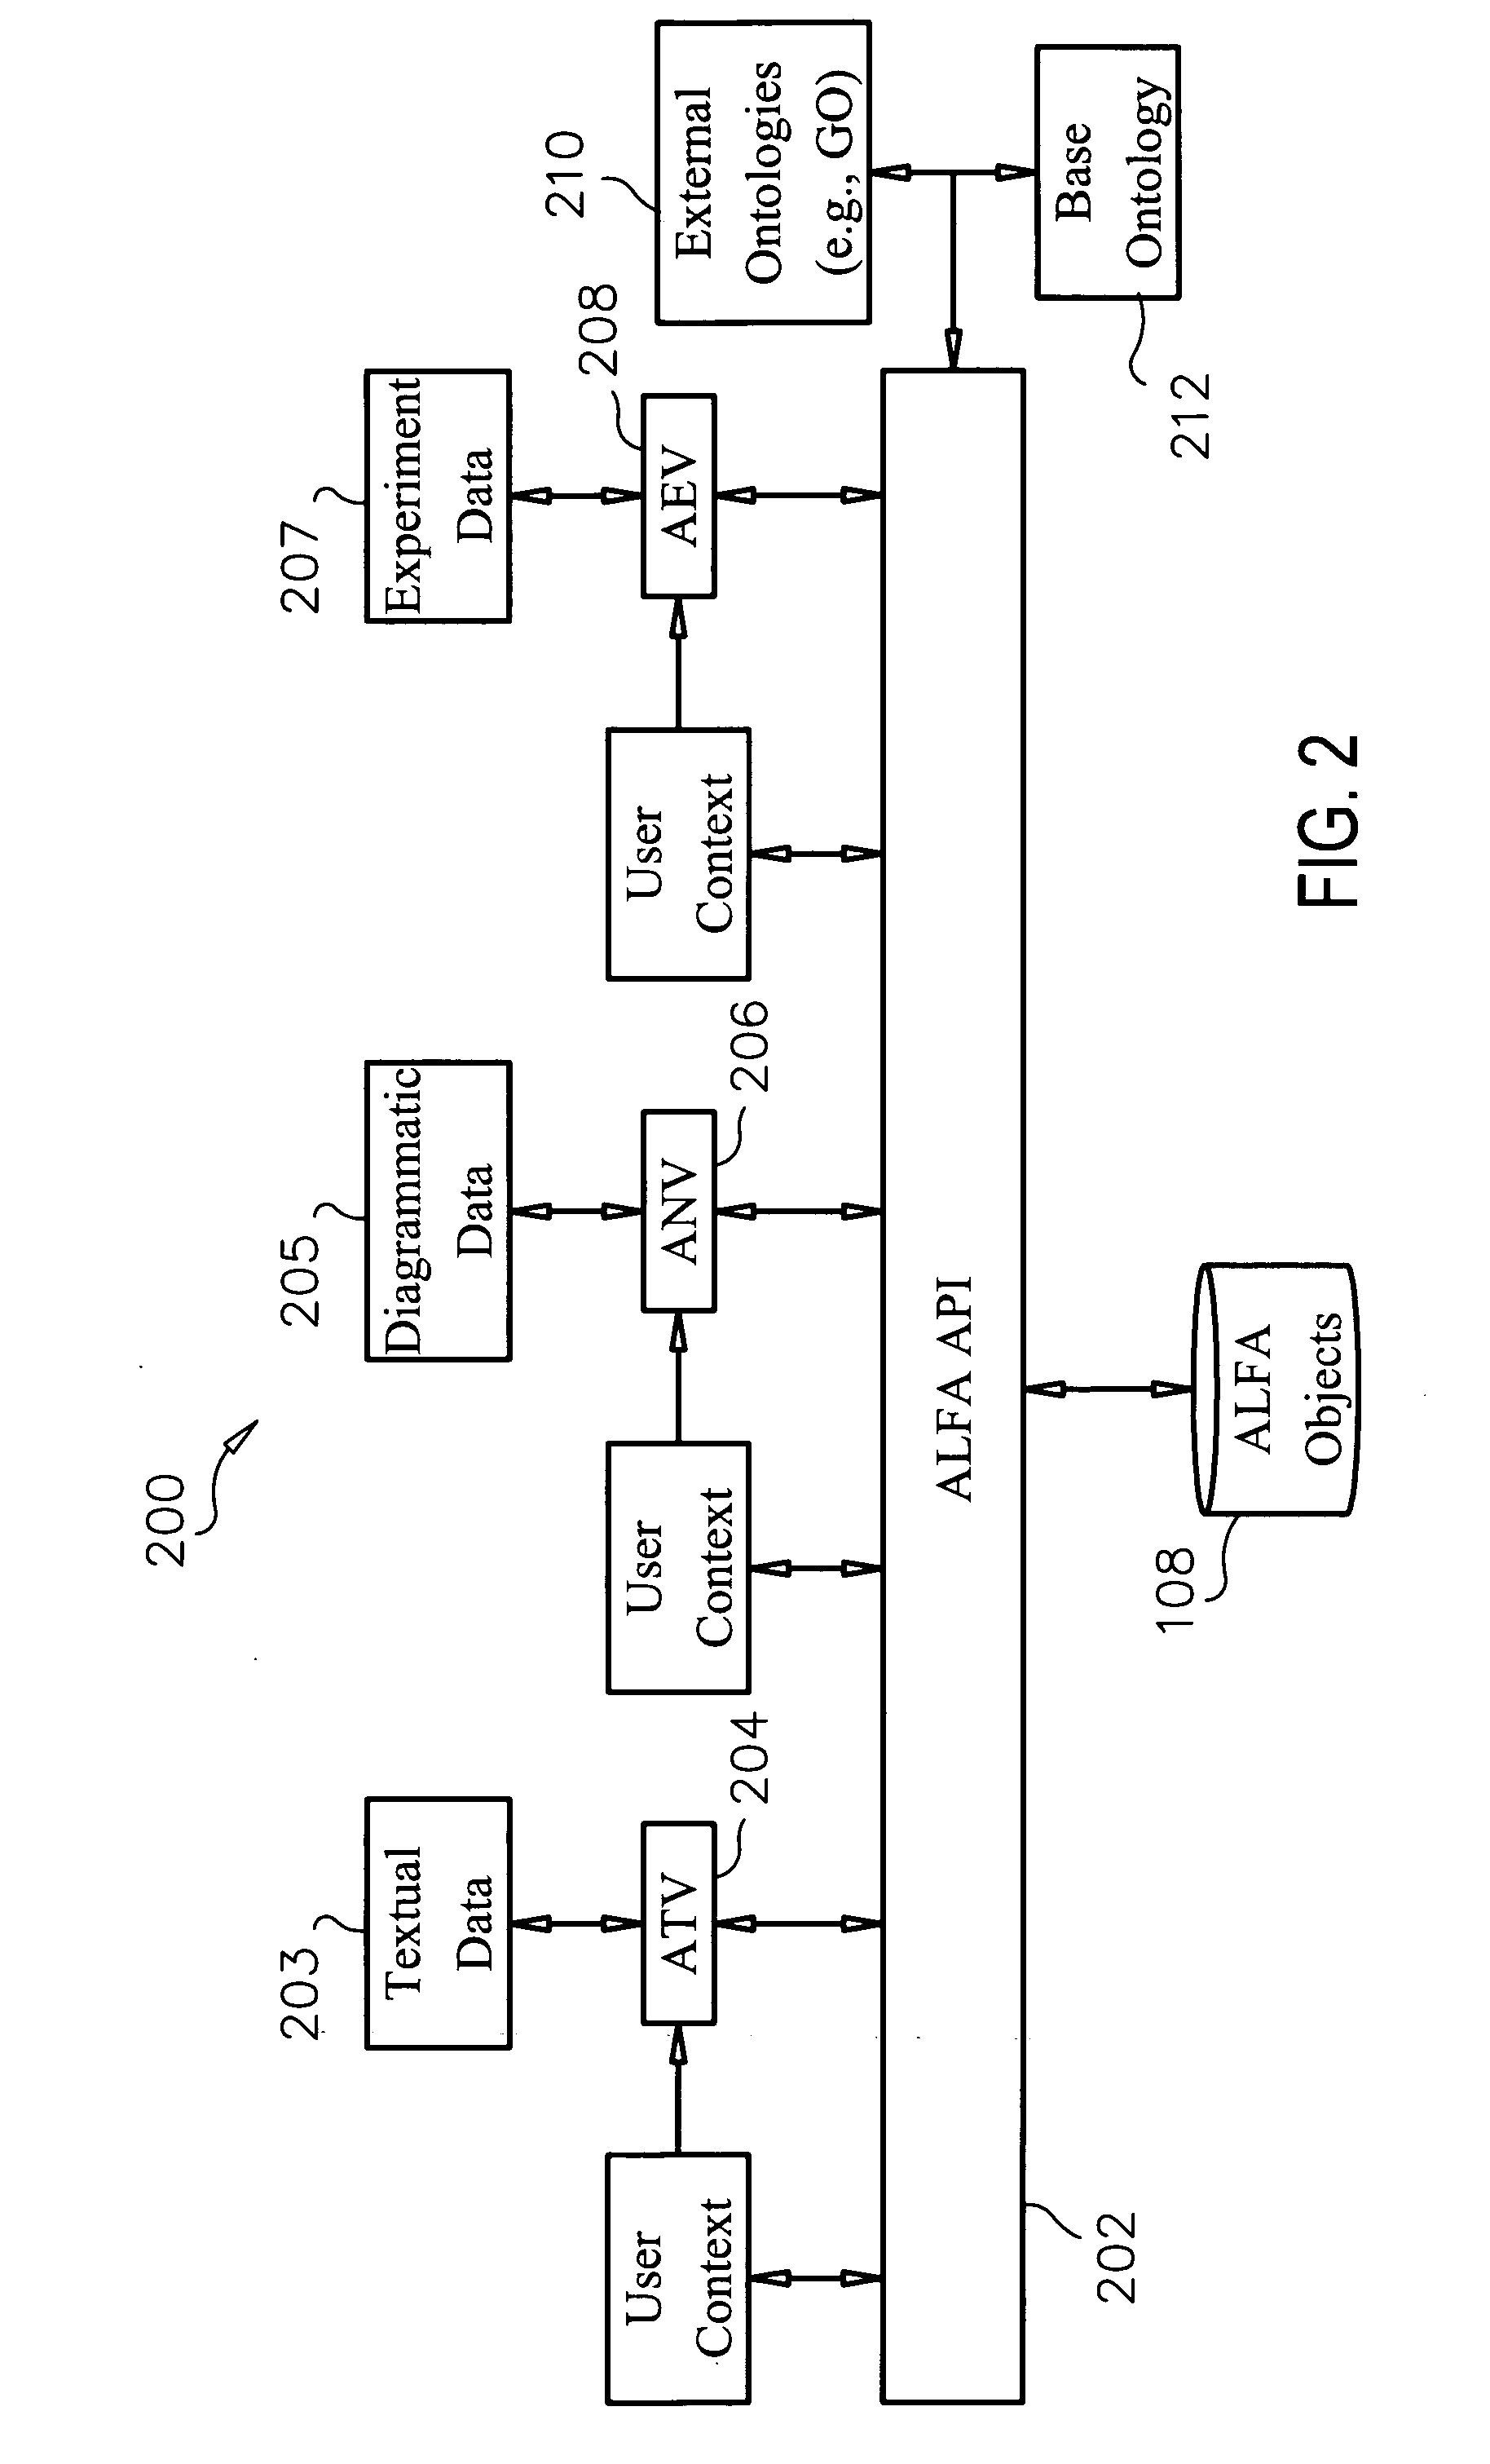 Methods and systems for extension, exploration, refinement, and analysis of biological networks